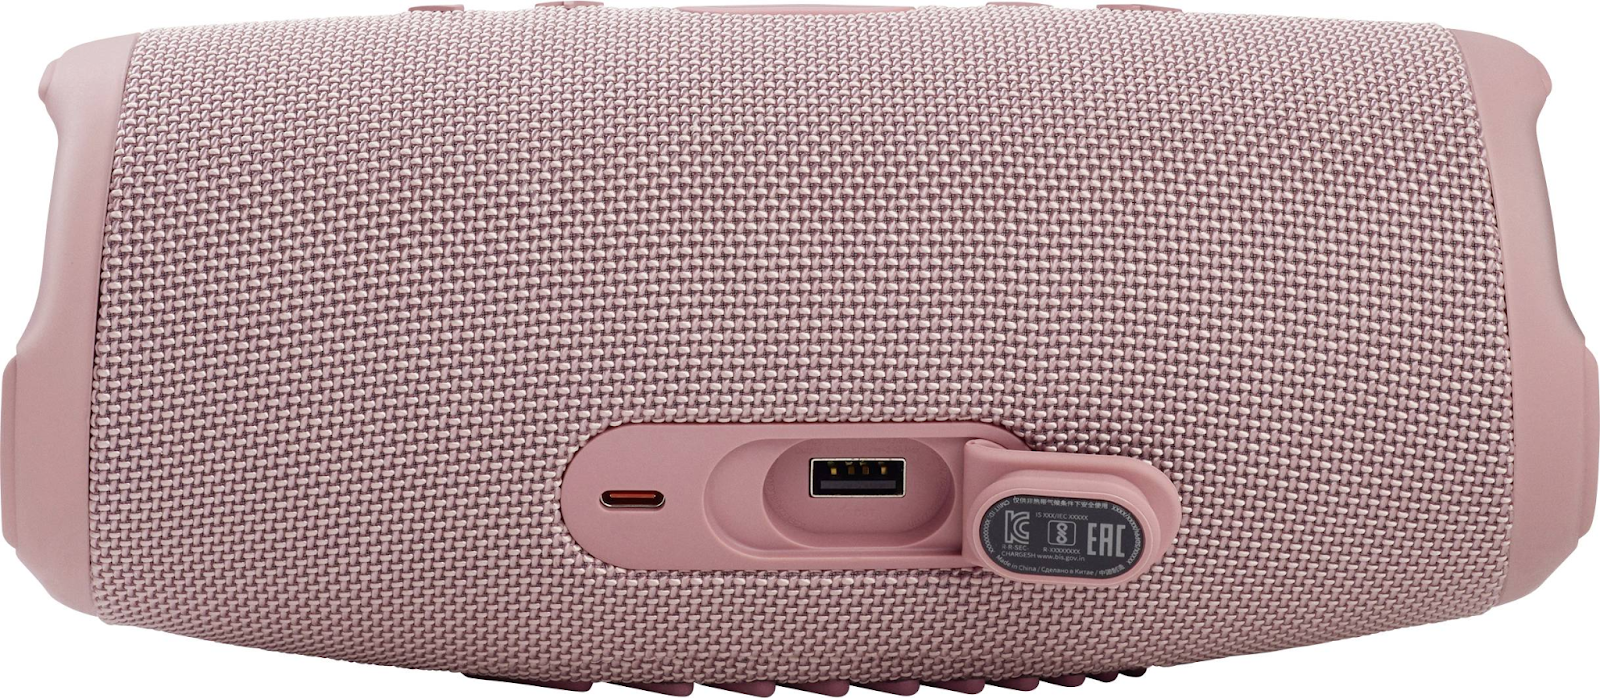 Wireless Connectivity Options for Pink JBL Speakers: A Comparison of Bluetooth, Wi-Fi, and NFC